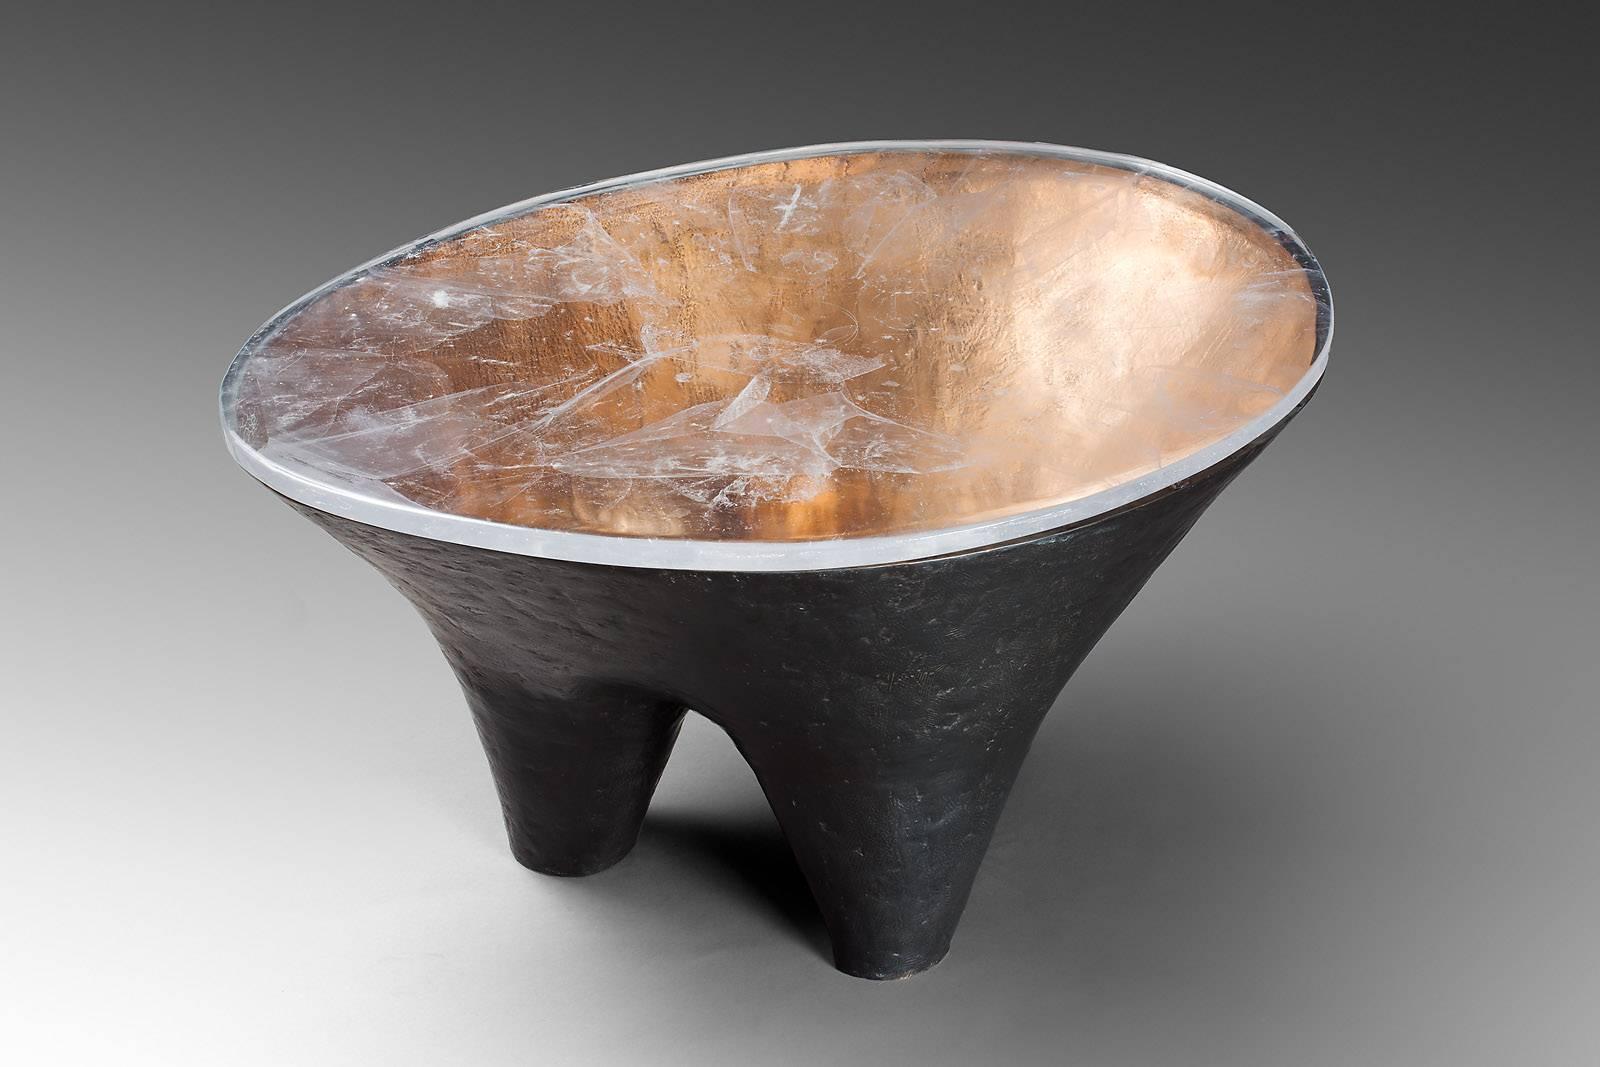 Franck Evennou 2013, Unique tripode Dolmen coffee table, Bronze, brown and gold patina, entrelacs of bronze, molten glass 80 X 60 X 46 cm, unique pieces,
Dated and Signed 
This unique bronze Dolmen table is presented with its molten glass top .or